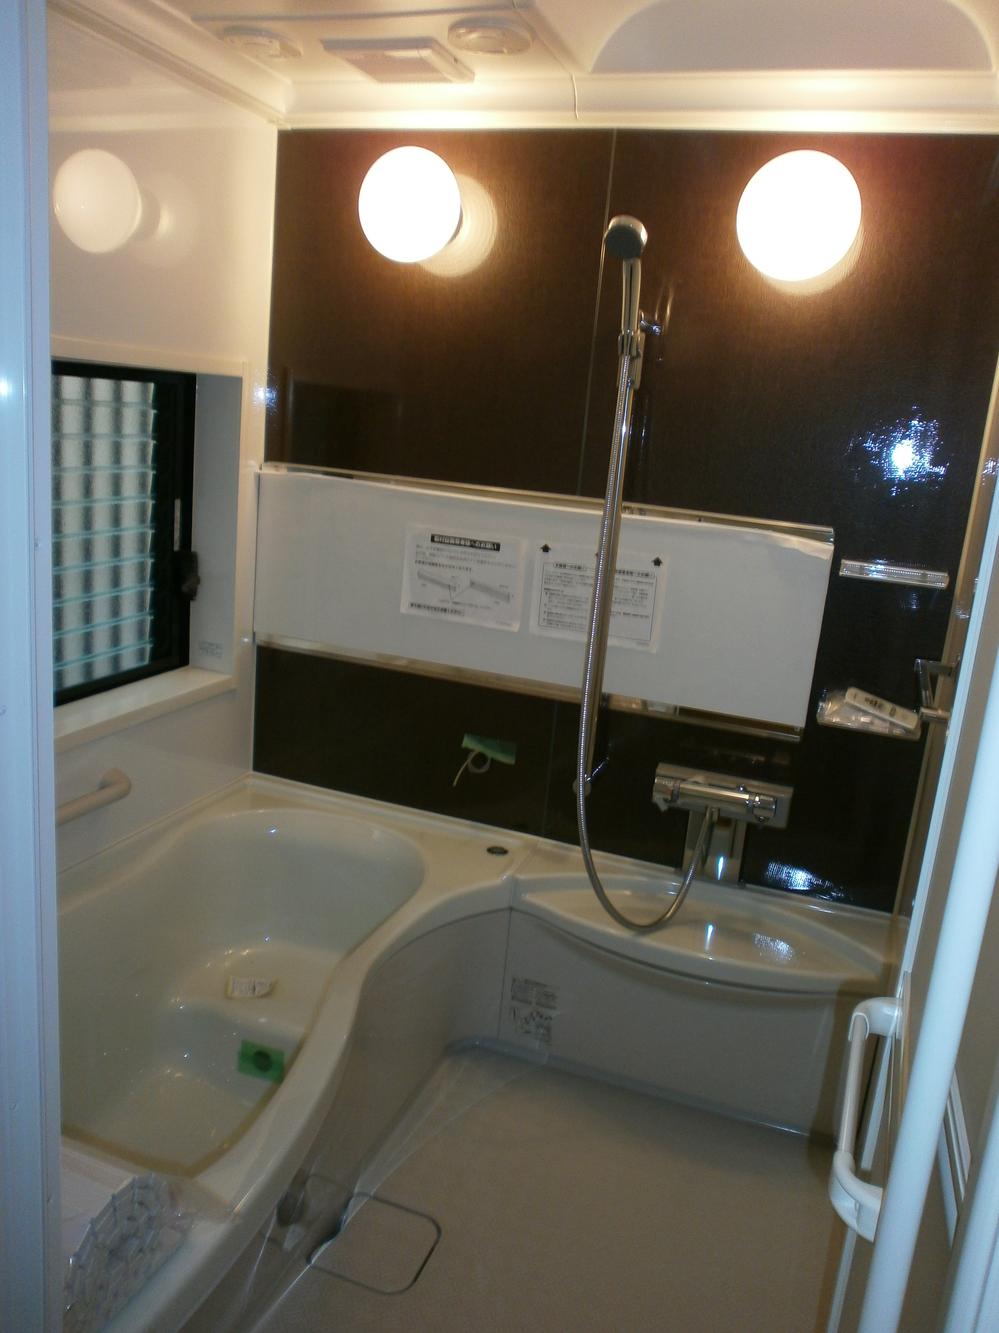 Bathroom. Is the unit bus of 1 pyeong type